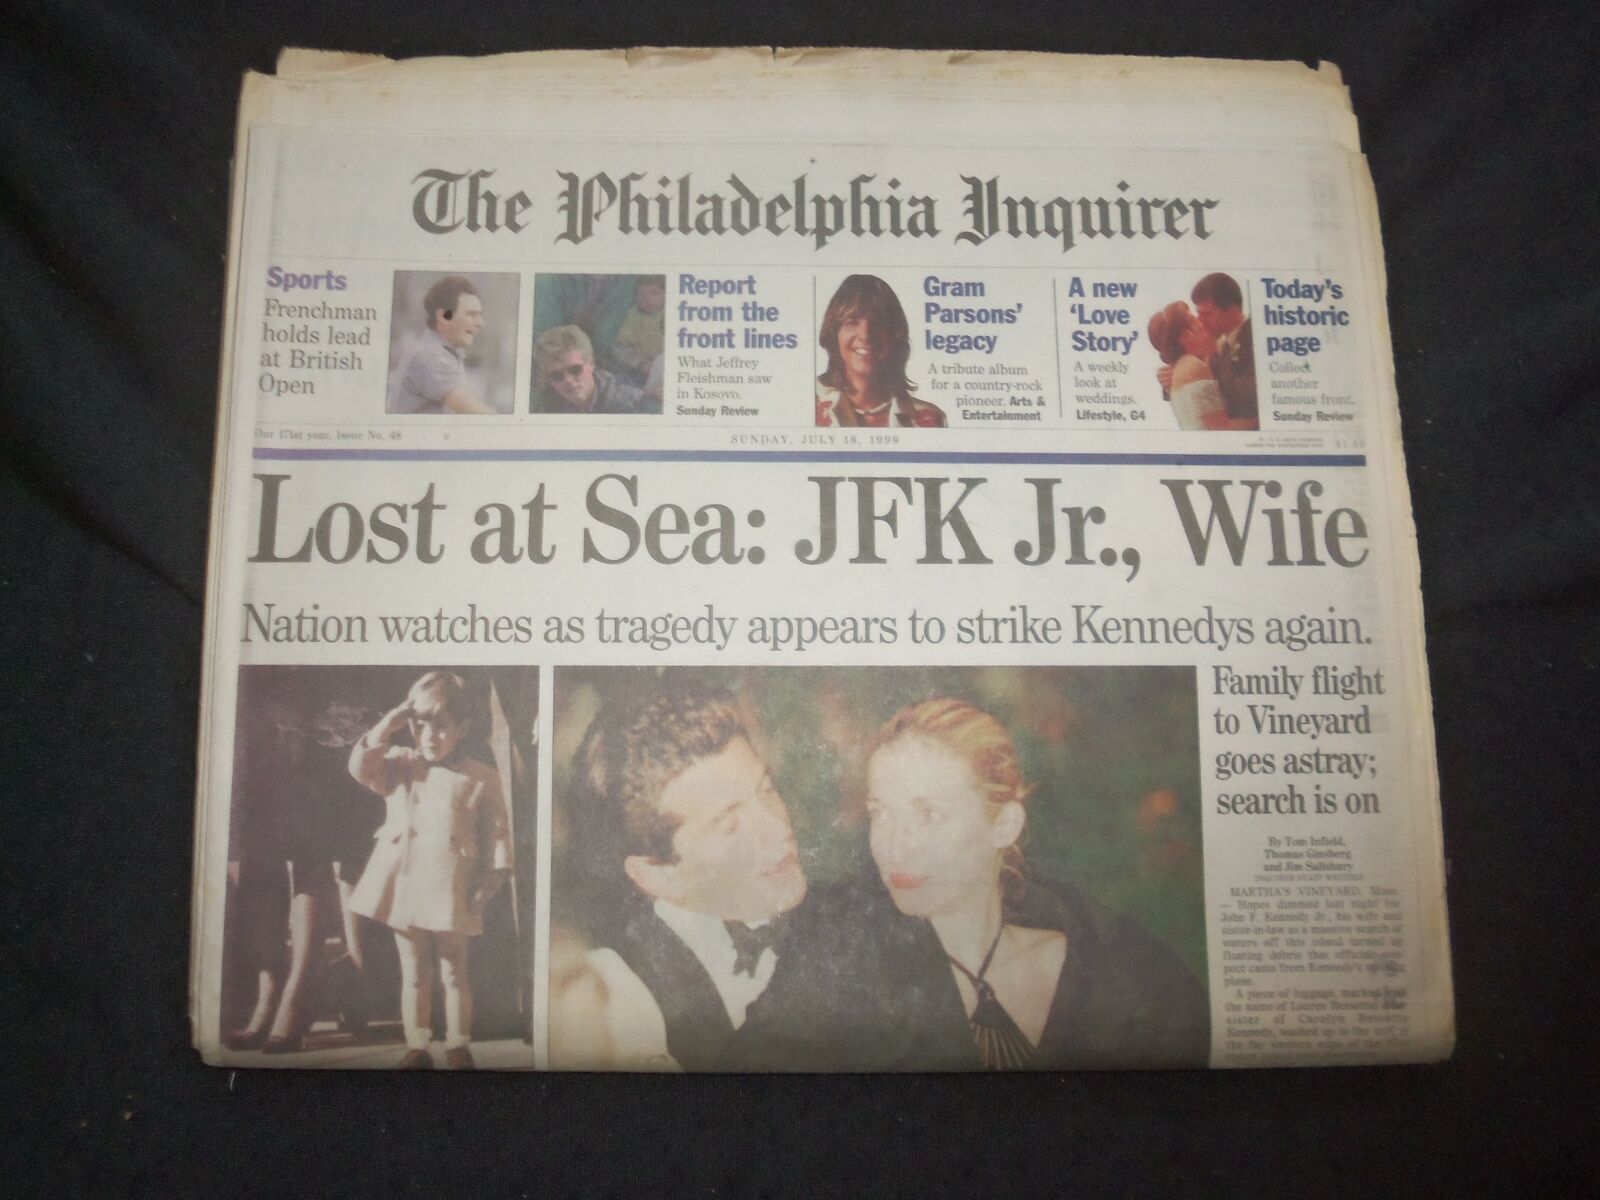 1999 JULY 18 PHILADELPHIA INQUIRER - LOST AT SEA: JFK JR. AND WIFE - NP 7459